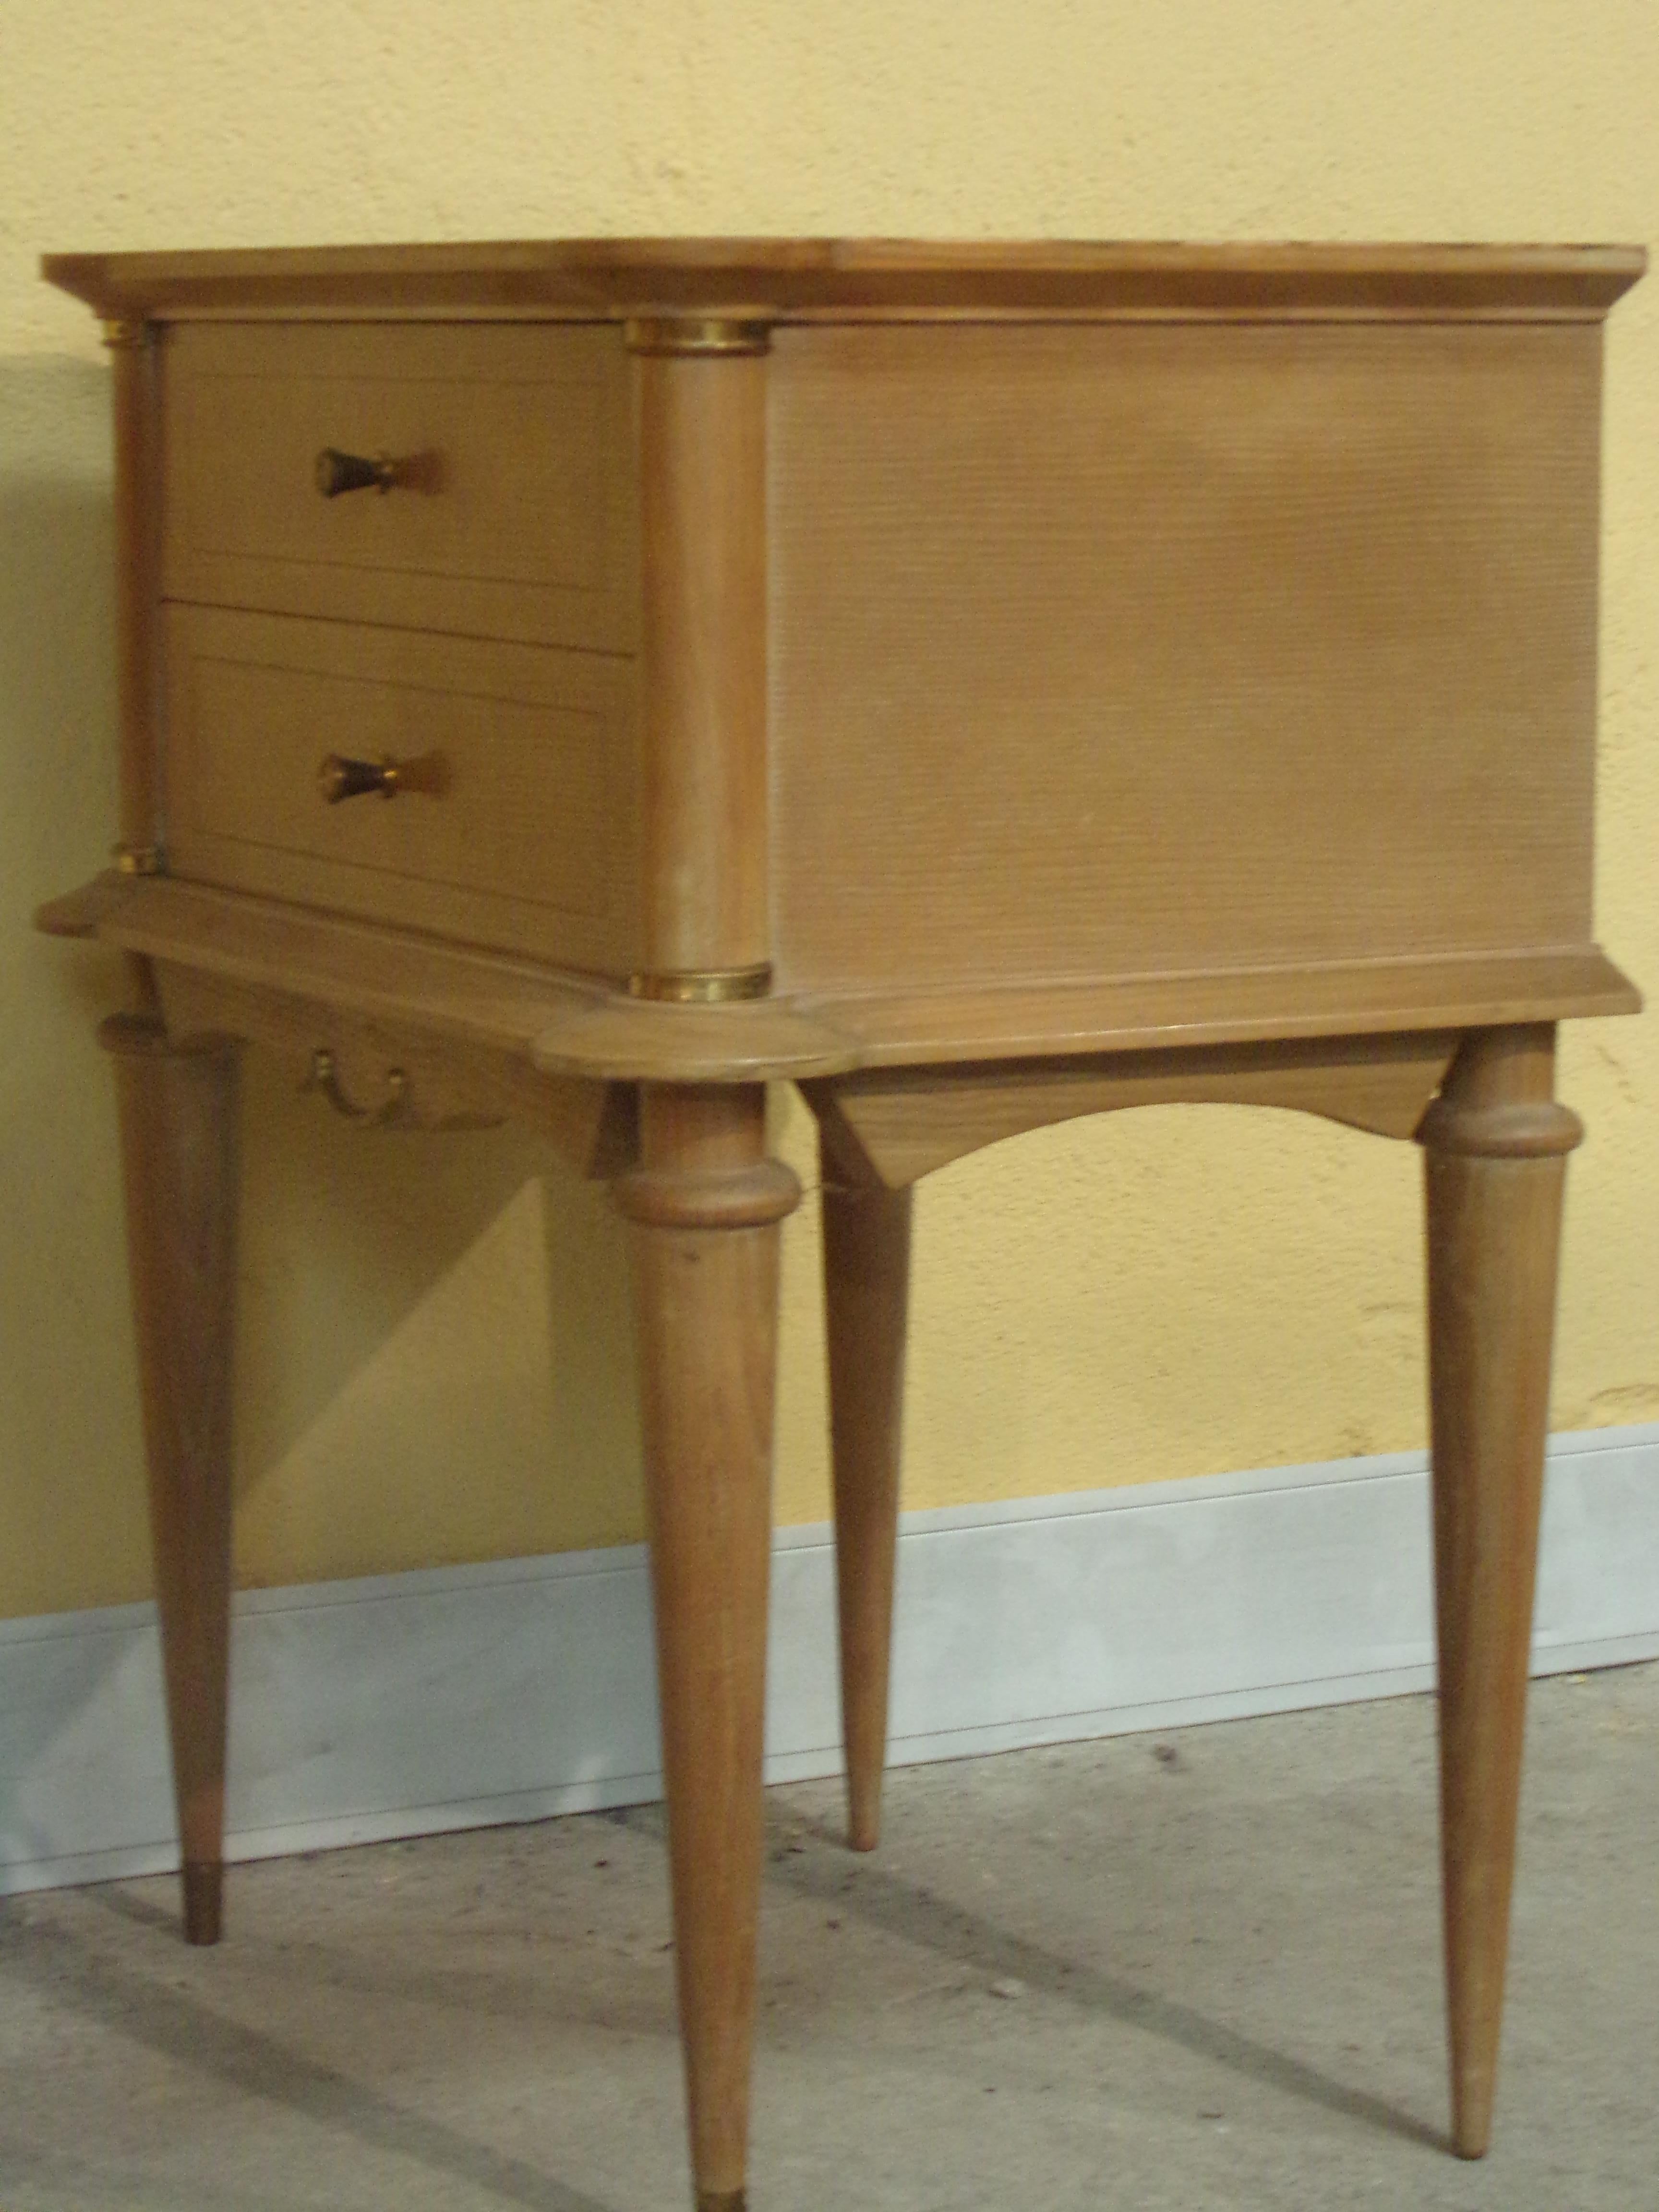 Other Pair of Bedside Cabinets For Sale